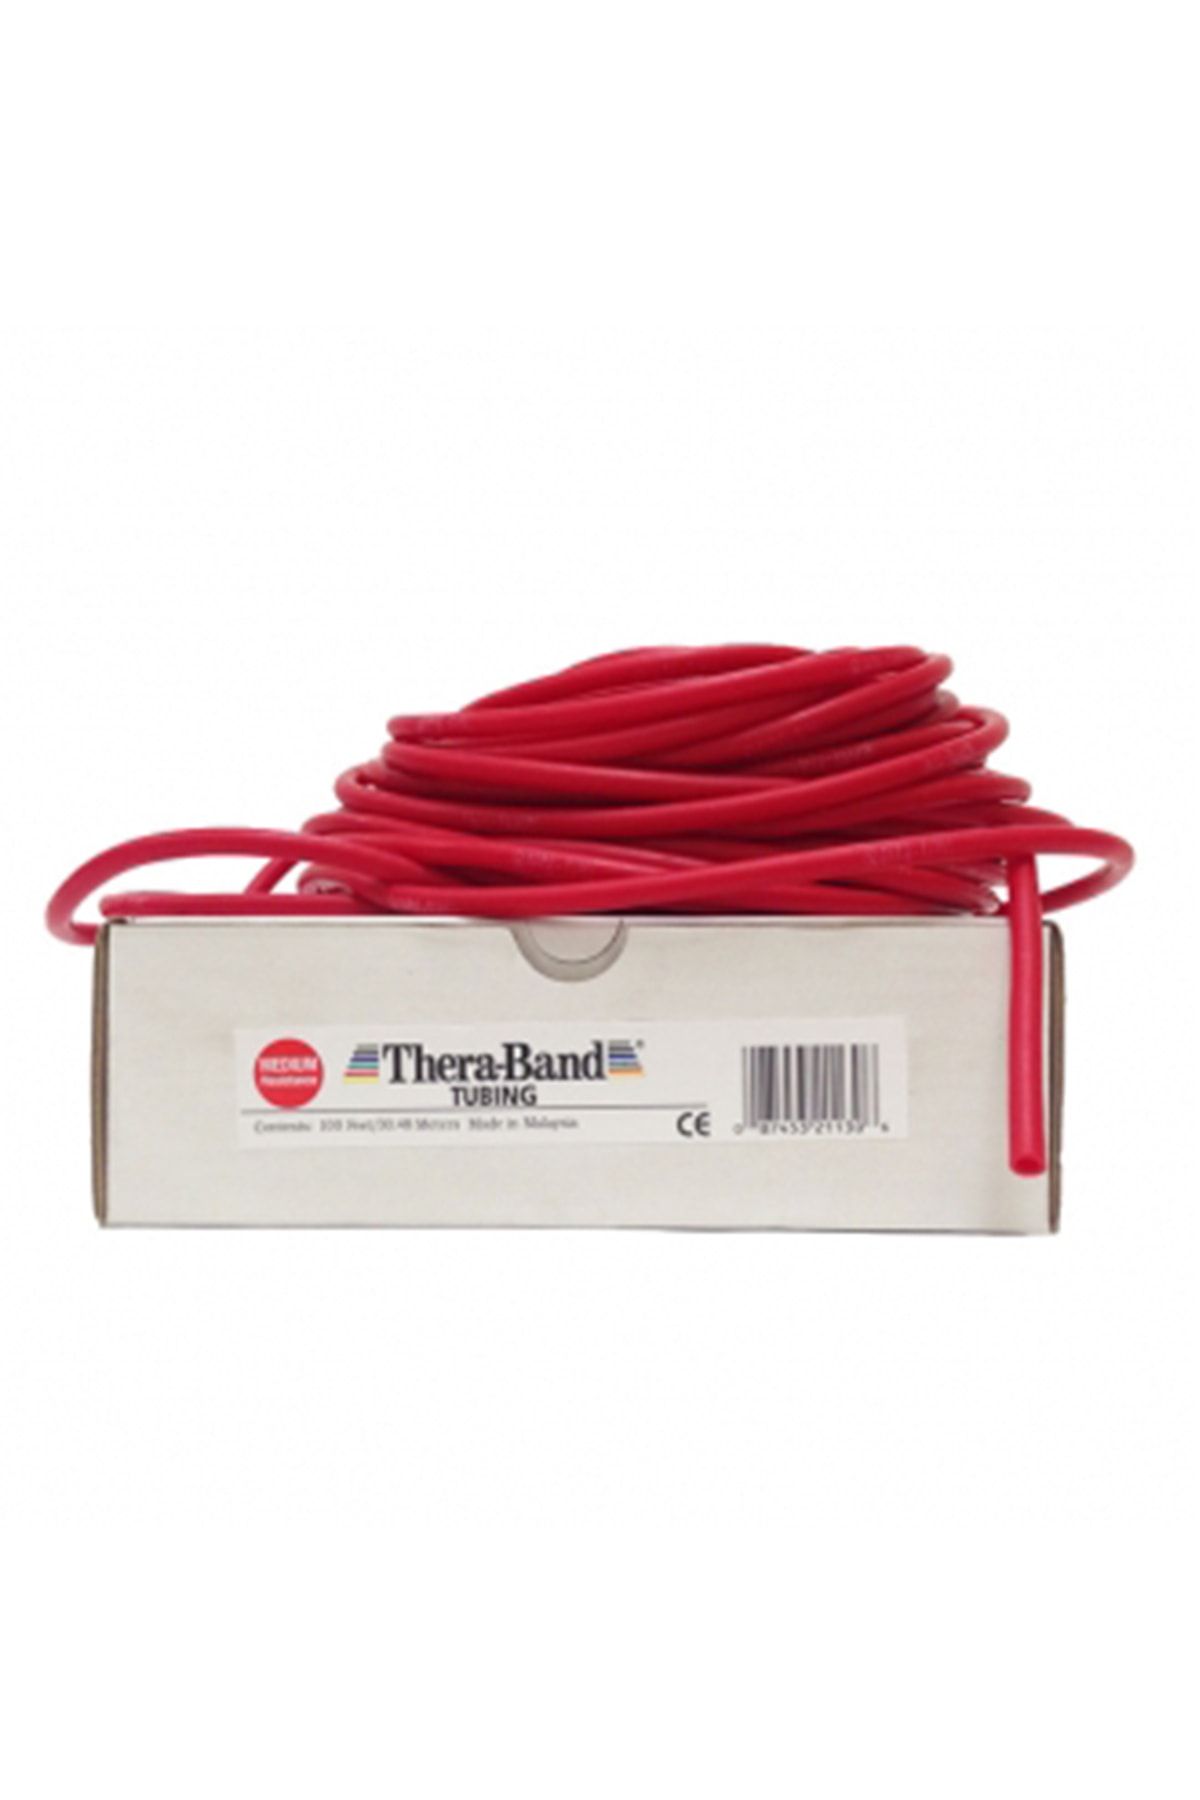 Theraband red tubıng 100ft ce